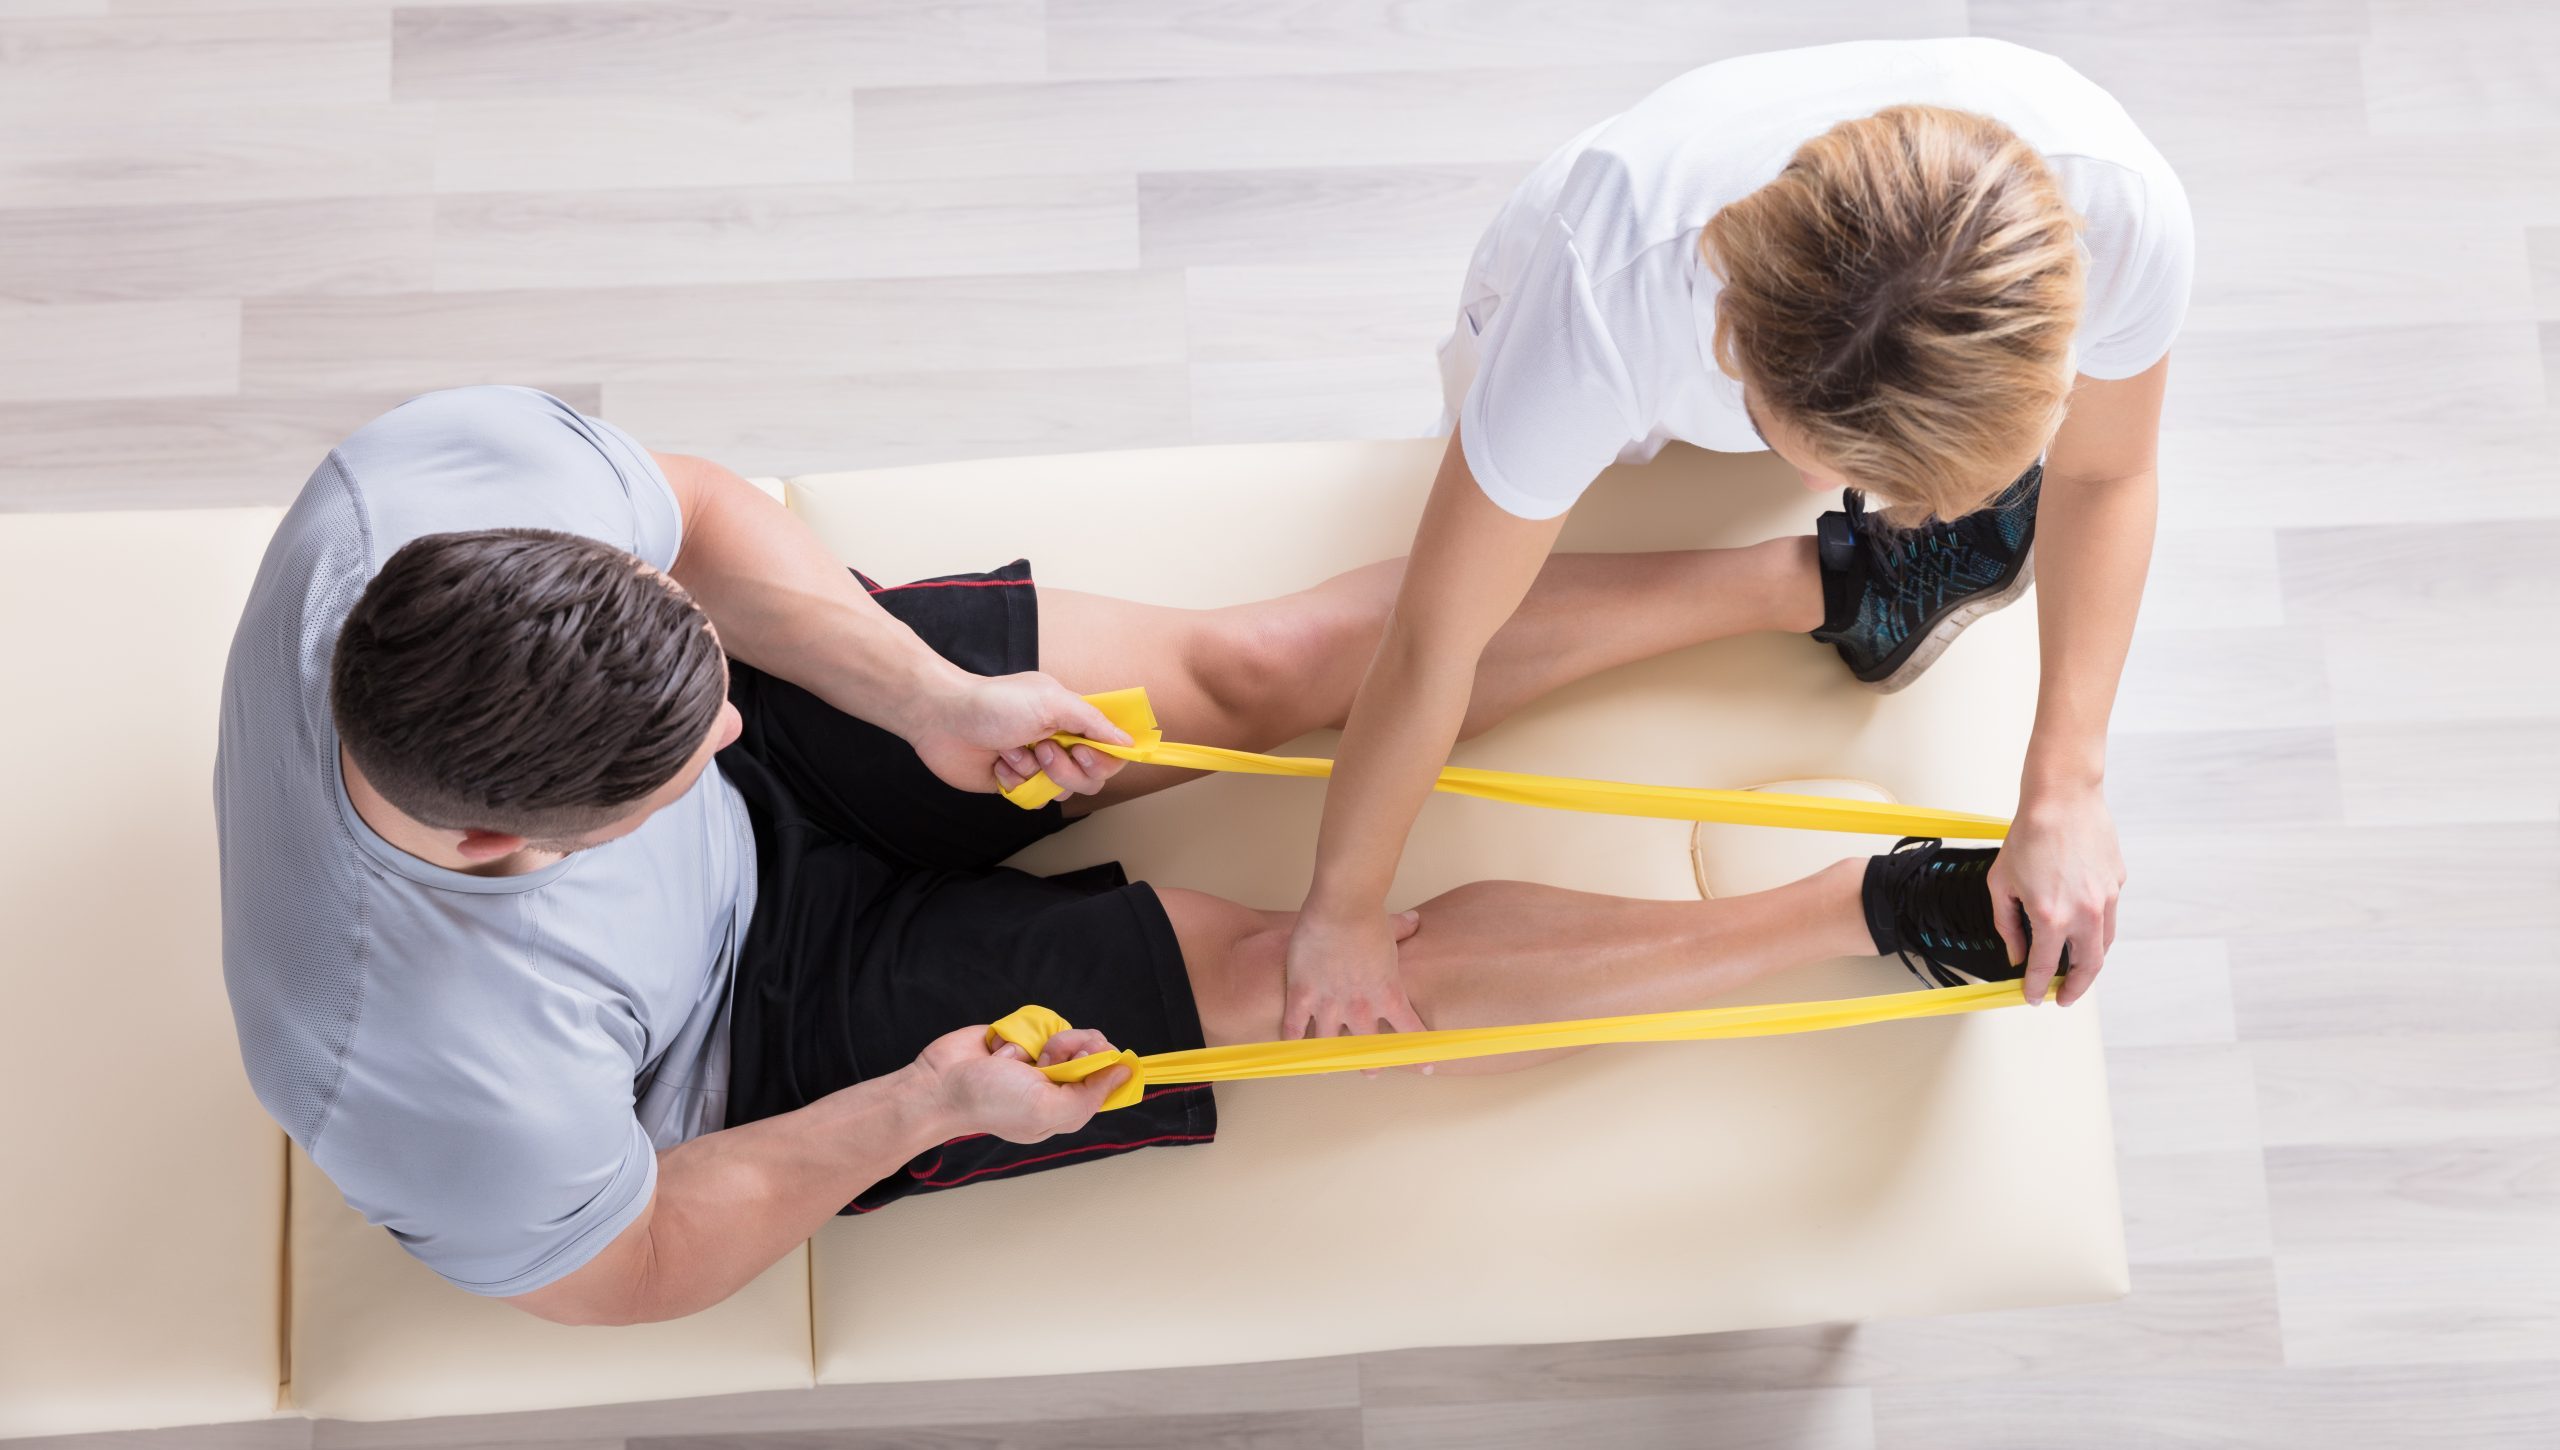 Image of a Physical Therapist assisting a patient for Empower Physical Therapy Group